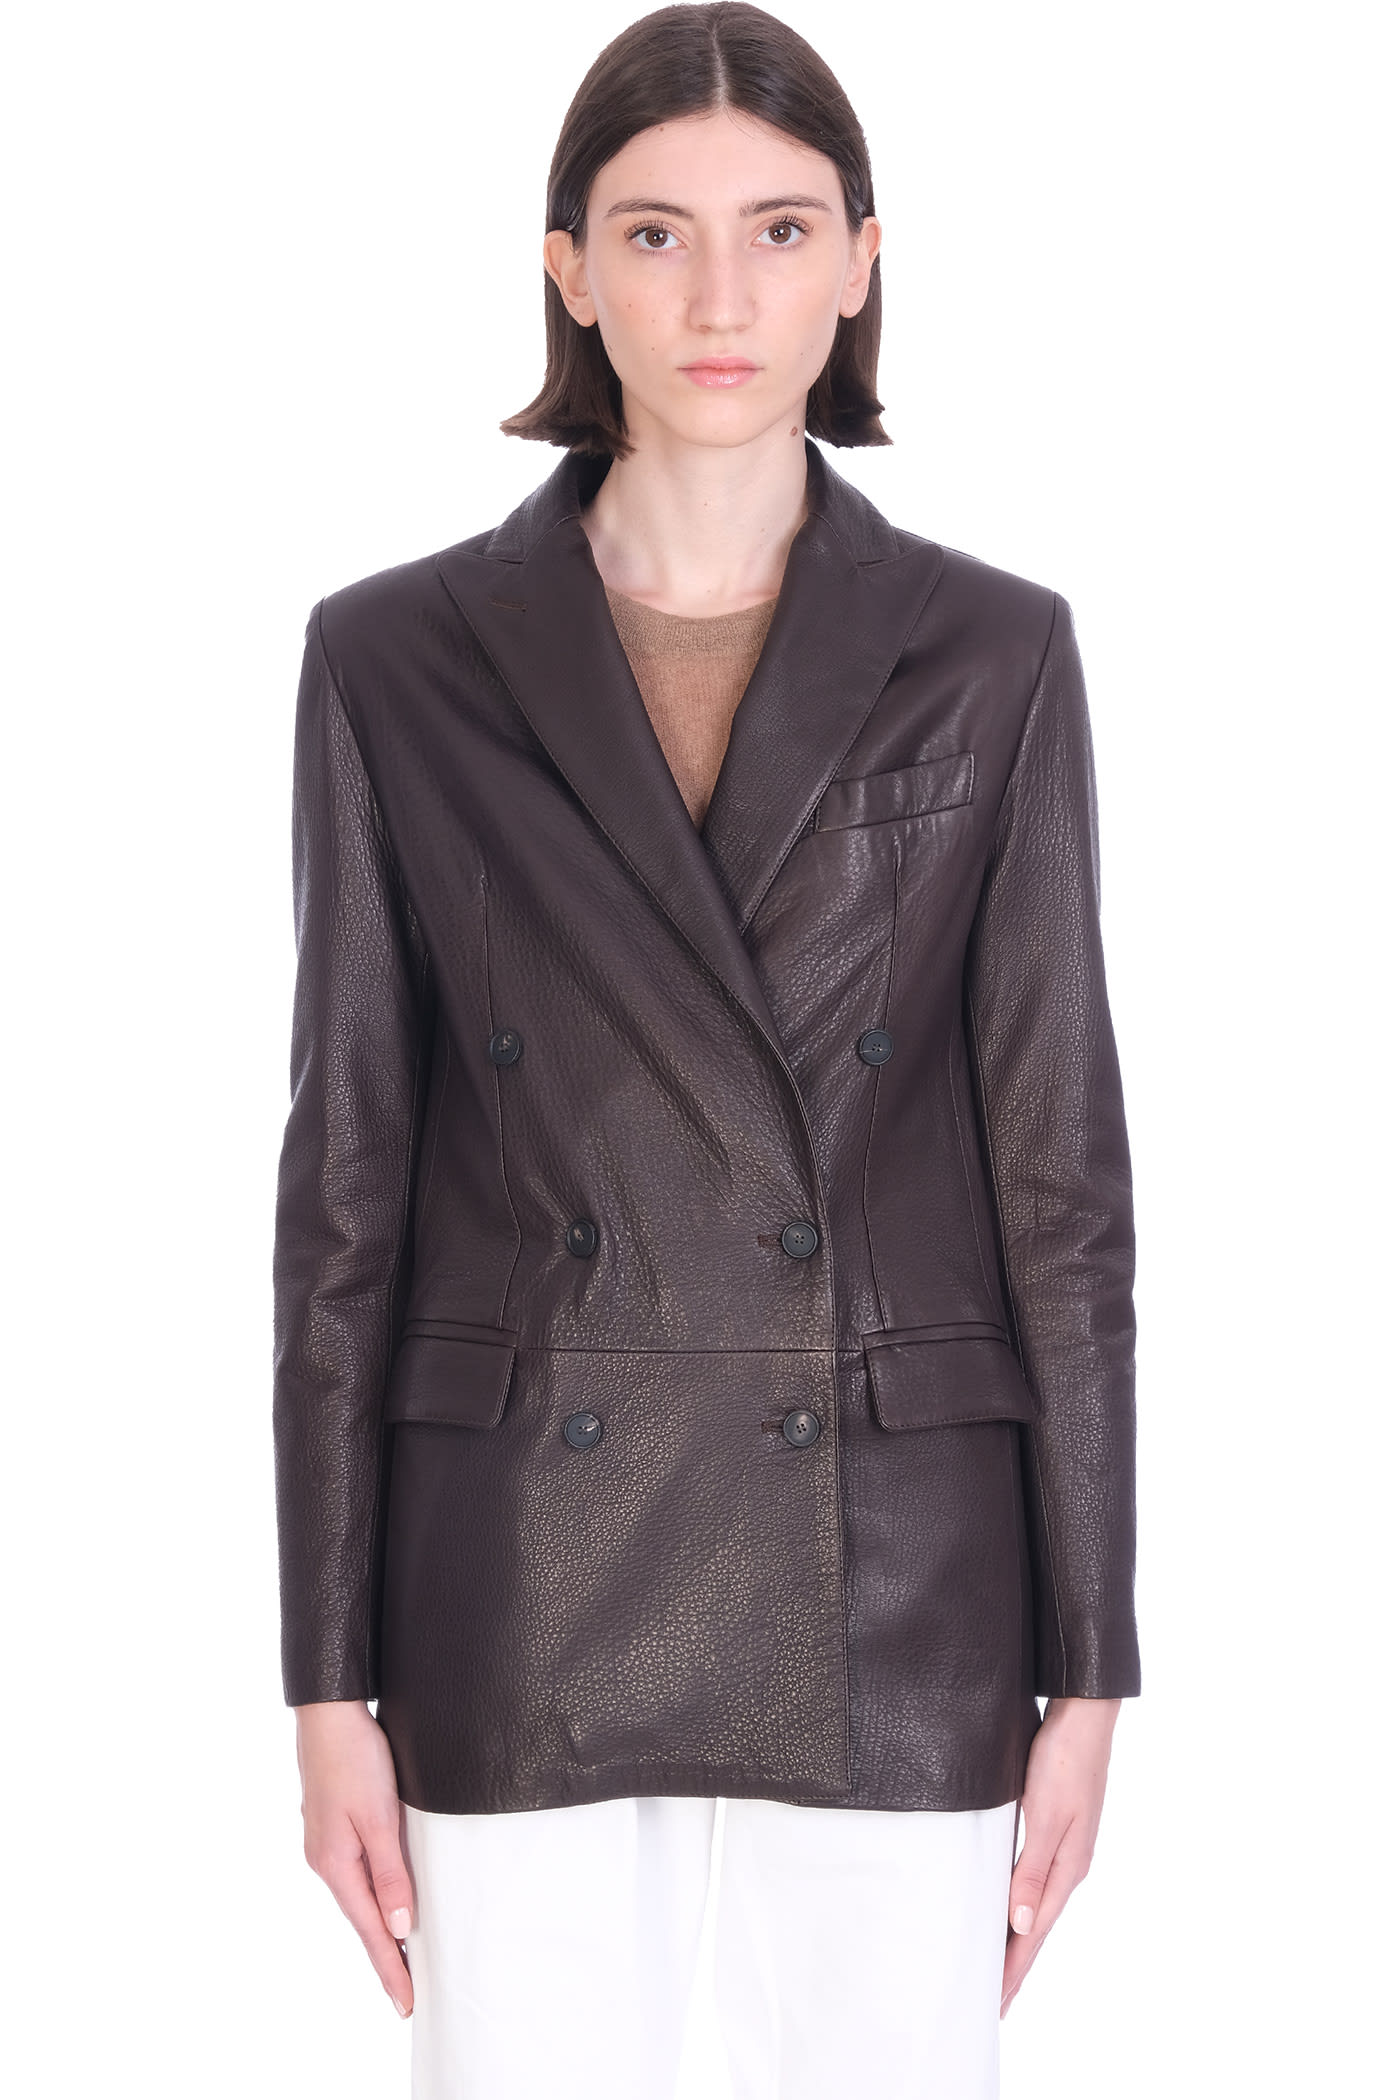 Tagliatore 0205 Josie Leather Jacket In Brown Leather